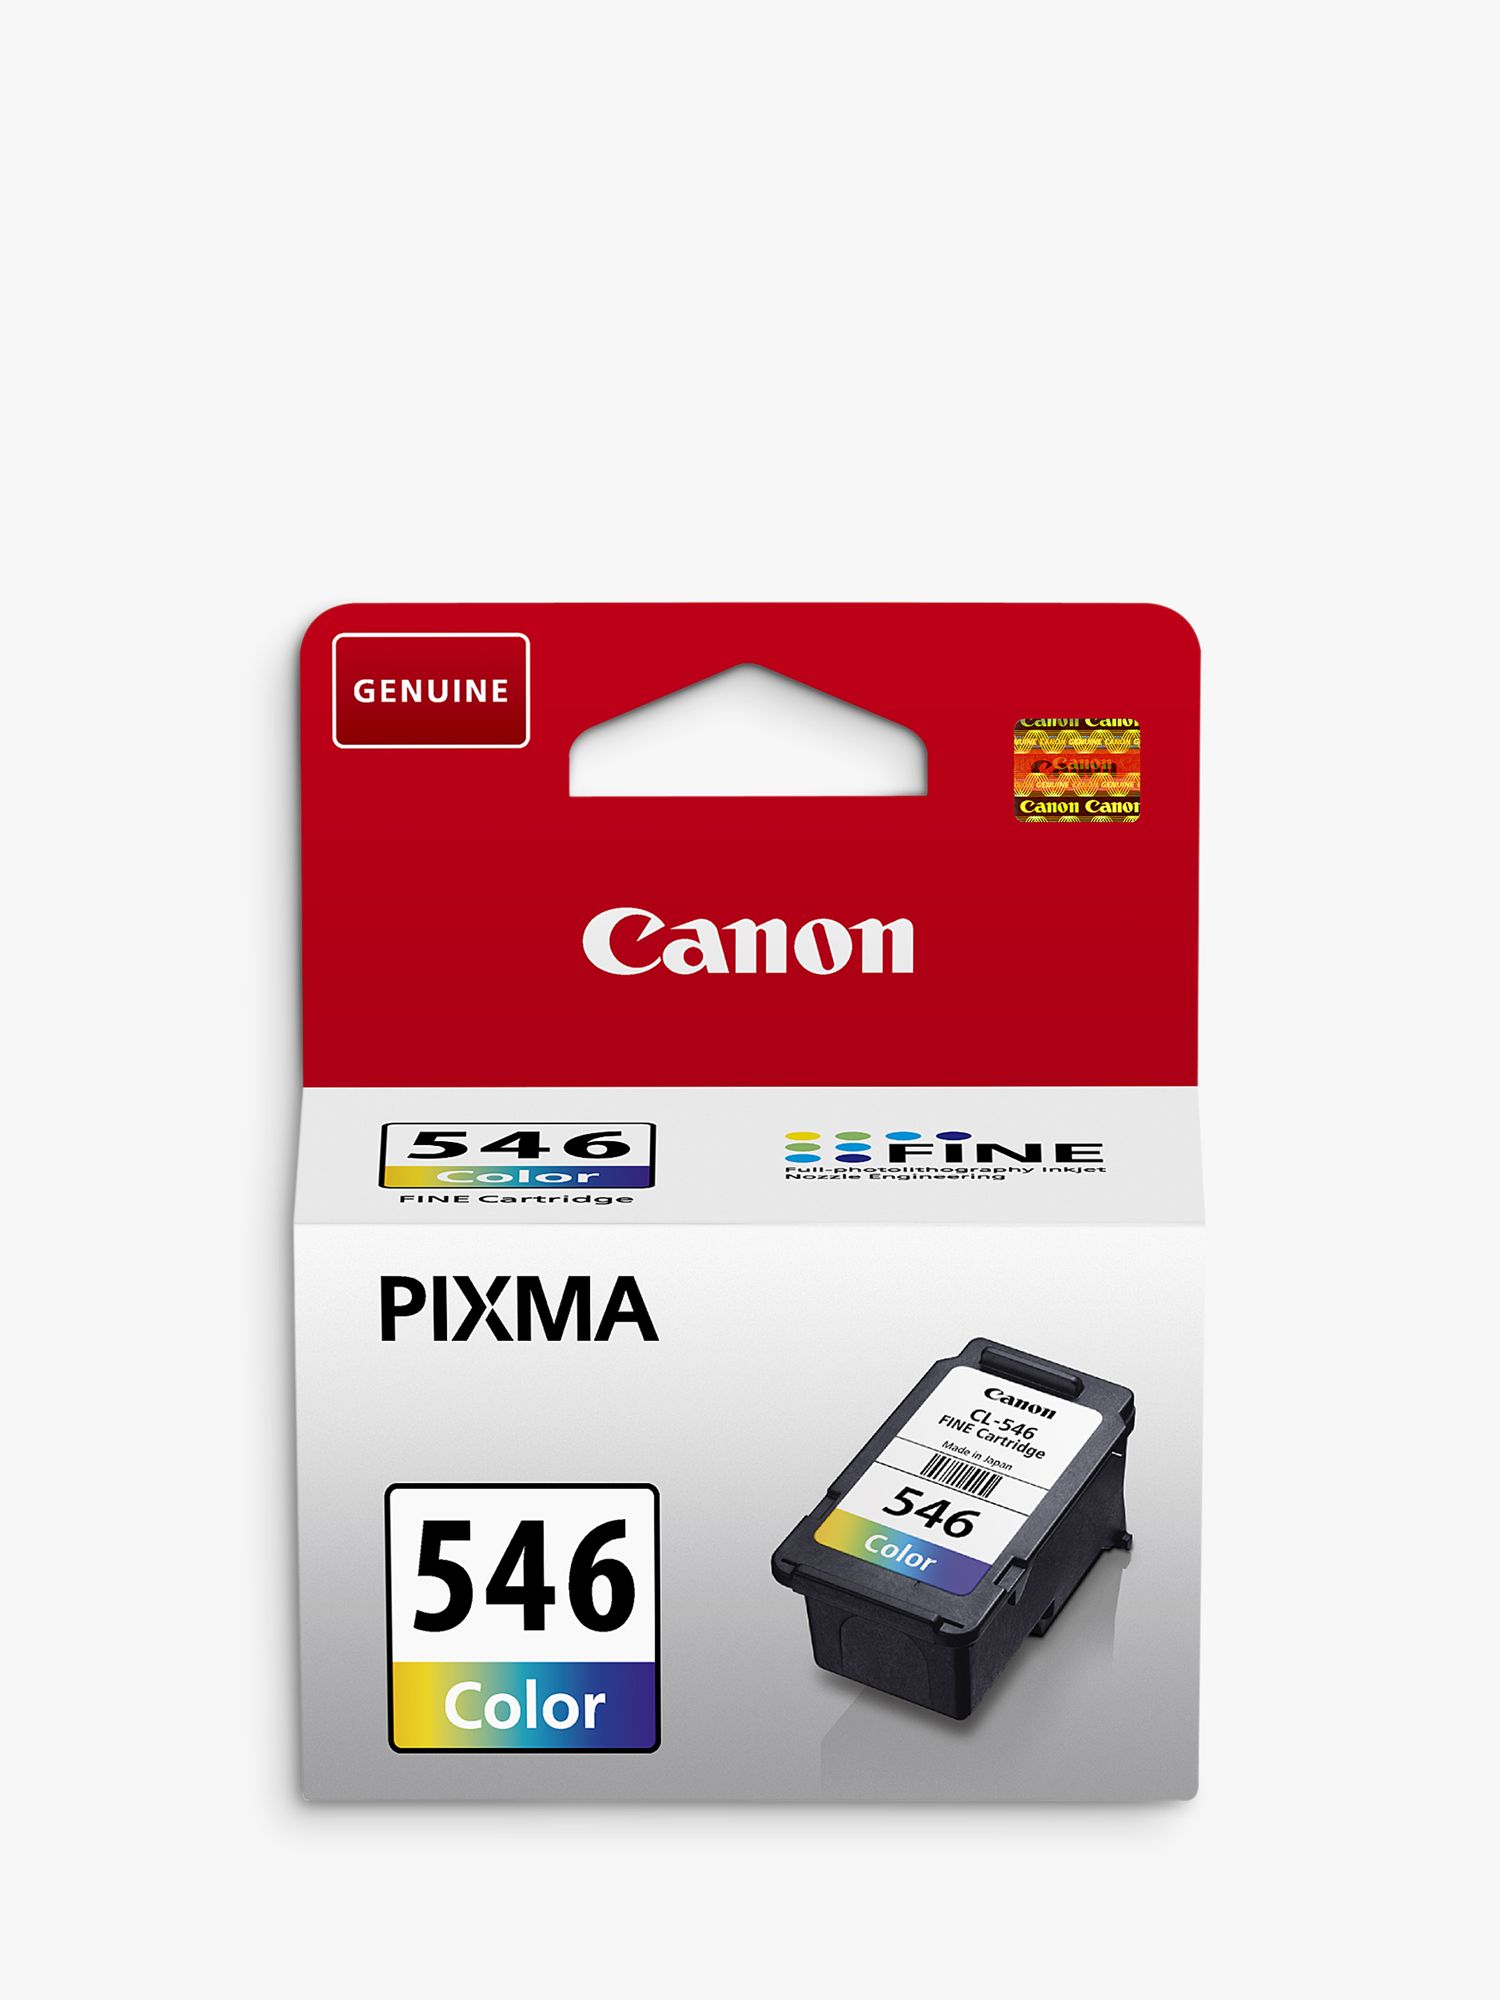 Canon PG545 / CL546 Ink Multipack